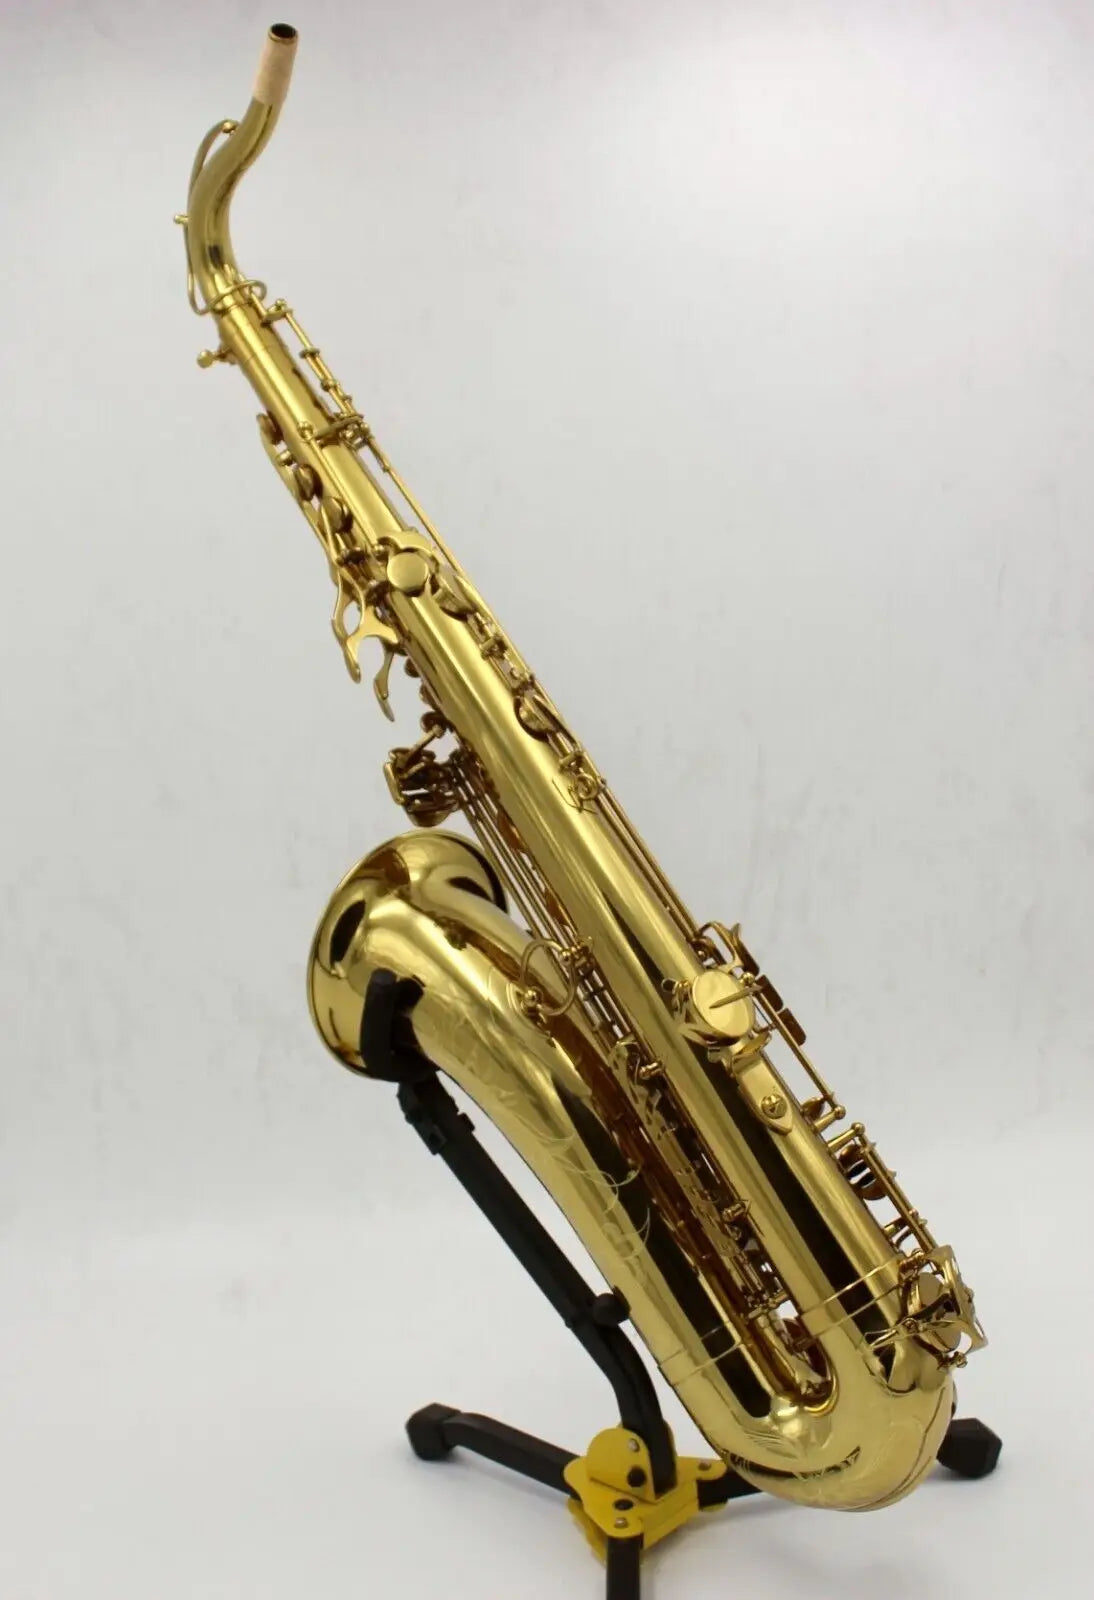 Eastern music champagne gold tenor saxophone Mark VI type no F# with flight case